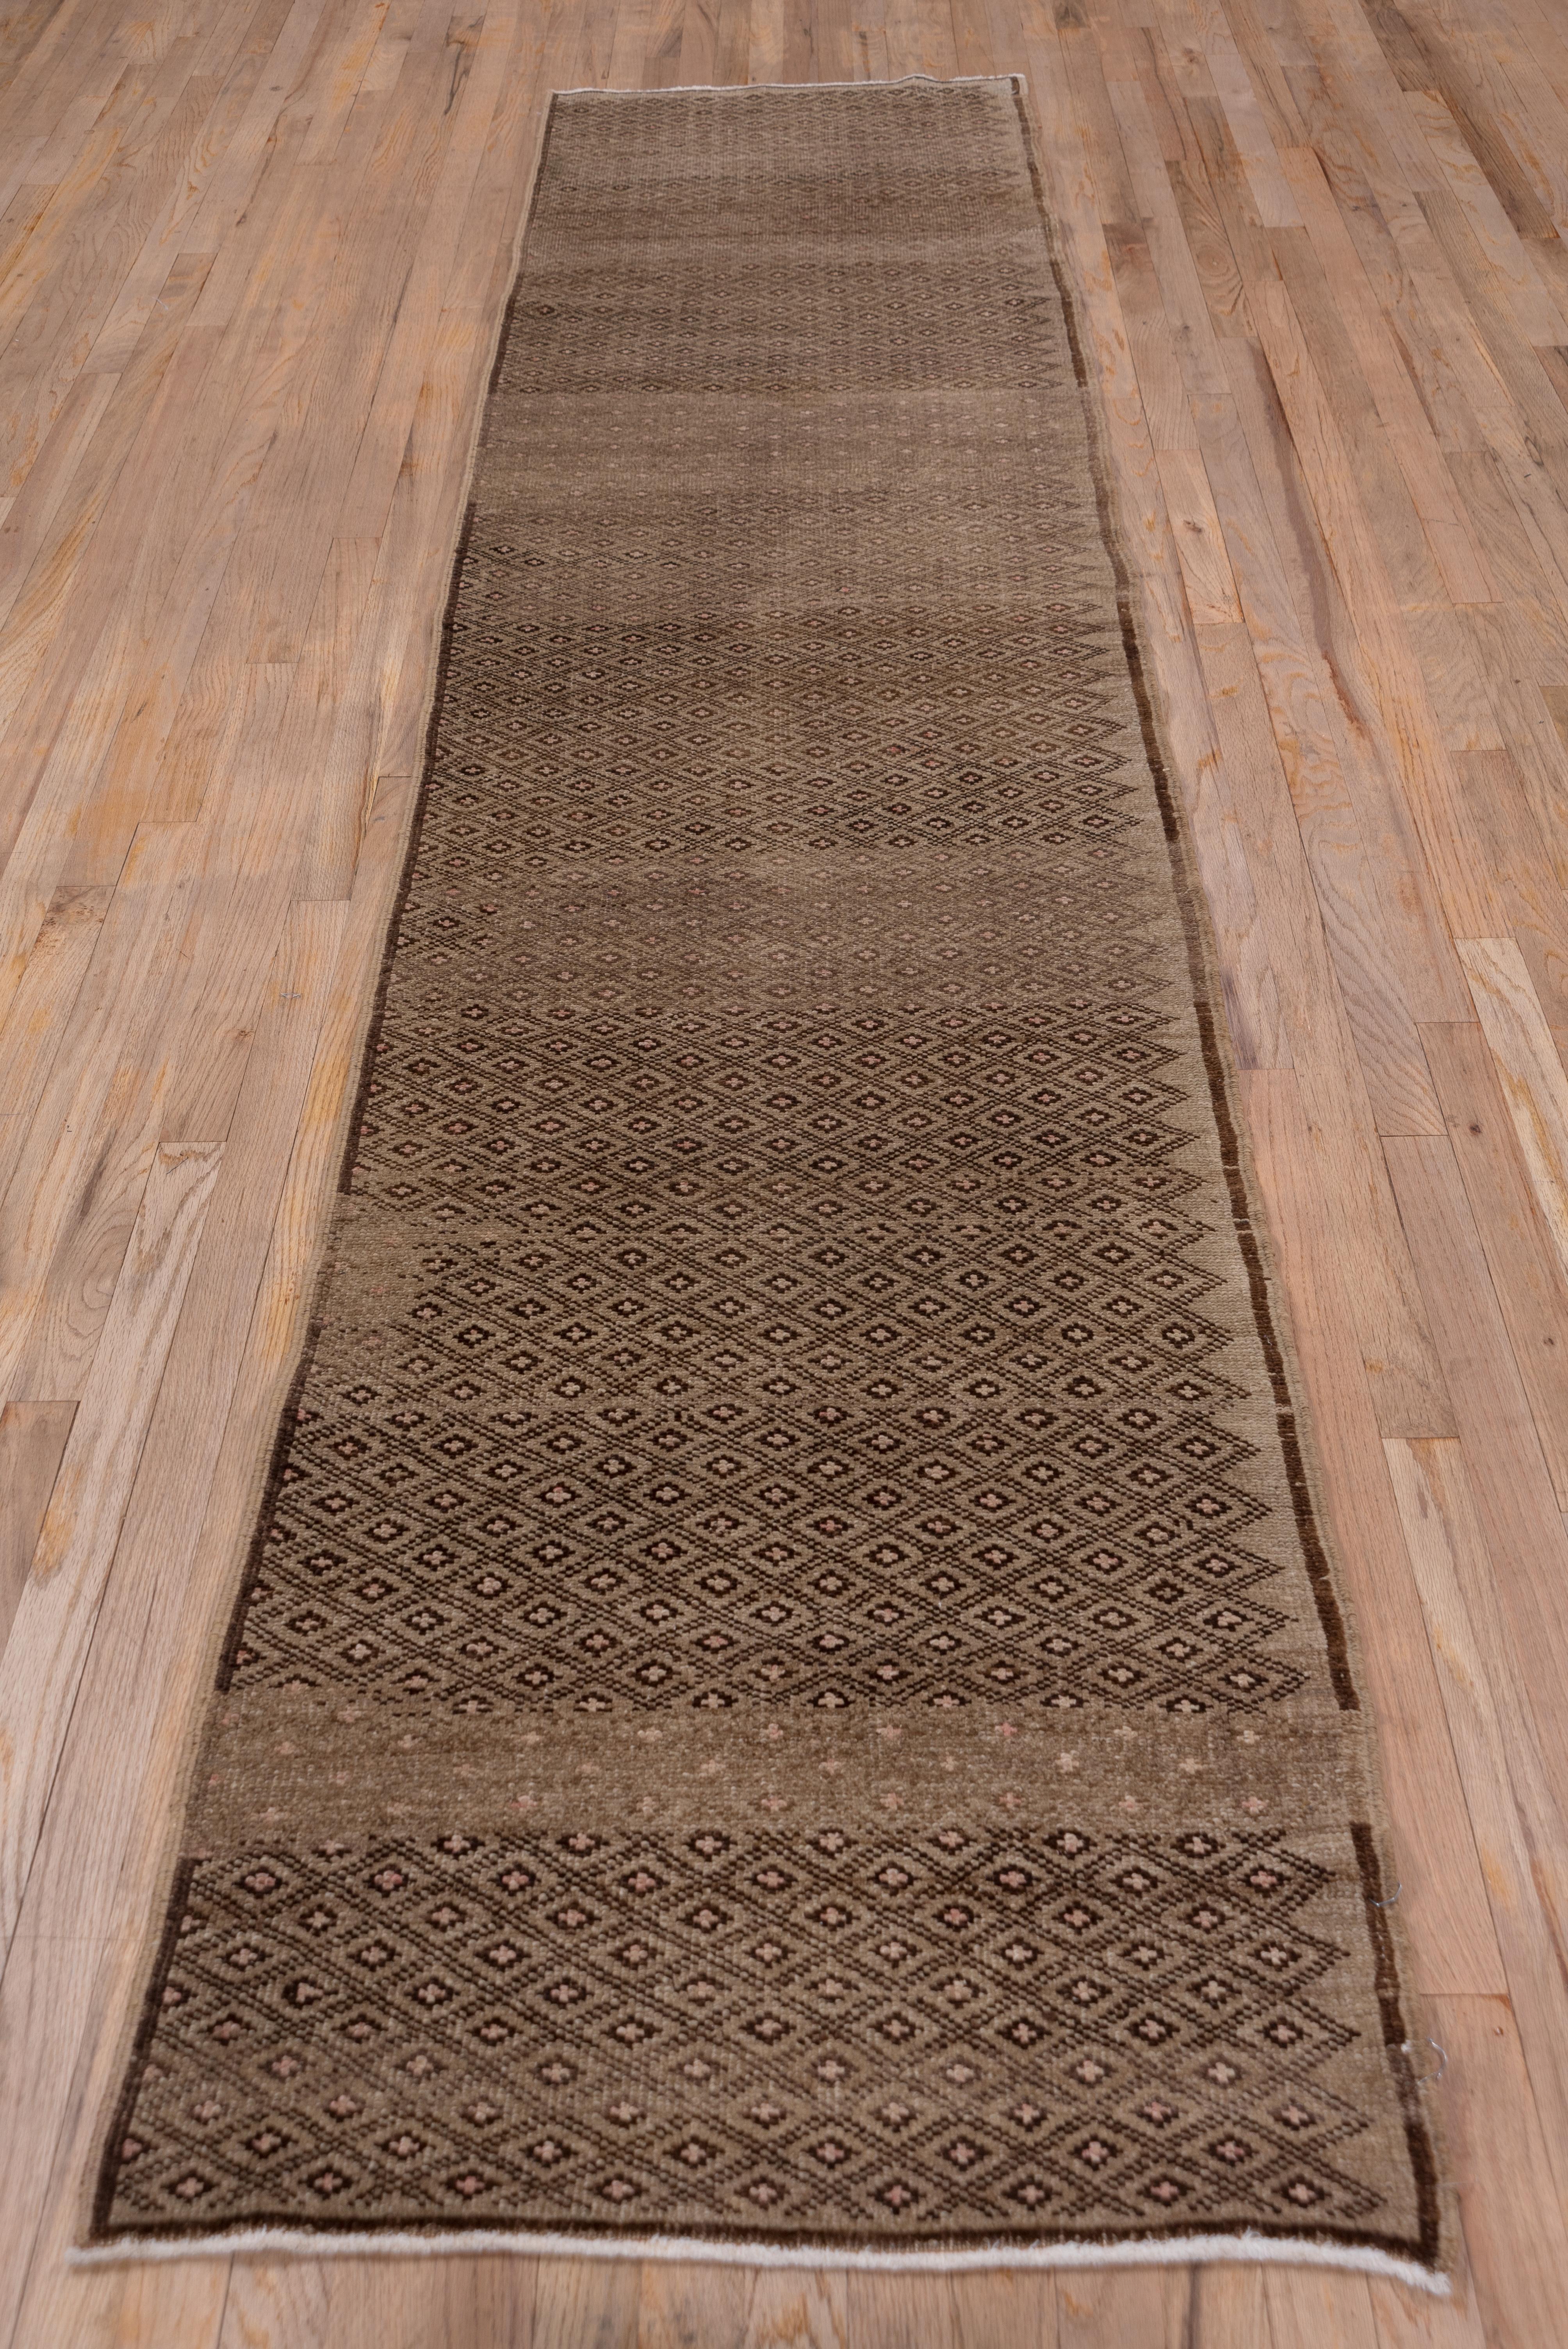 Both the narrow string plain brown border and the light brown field are simultaneously abrashed in this good condition central Turkish rustic runner. The doubly line lozenge lattice encloses small dark brown and ivory devices. The lattice and the